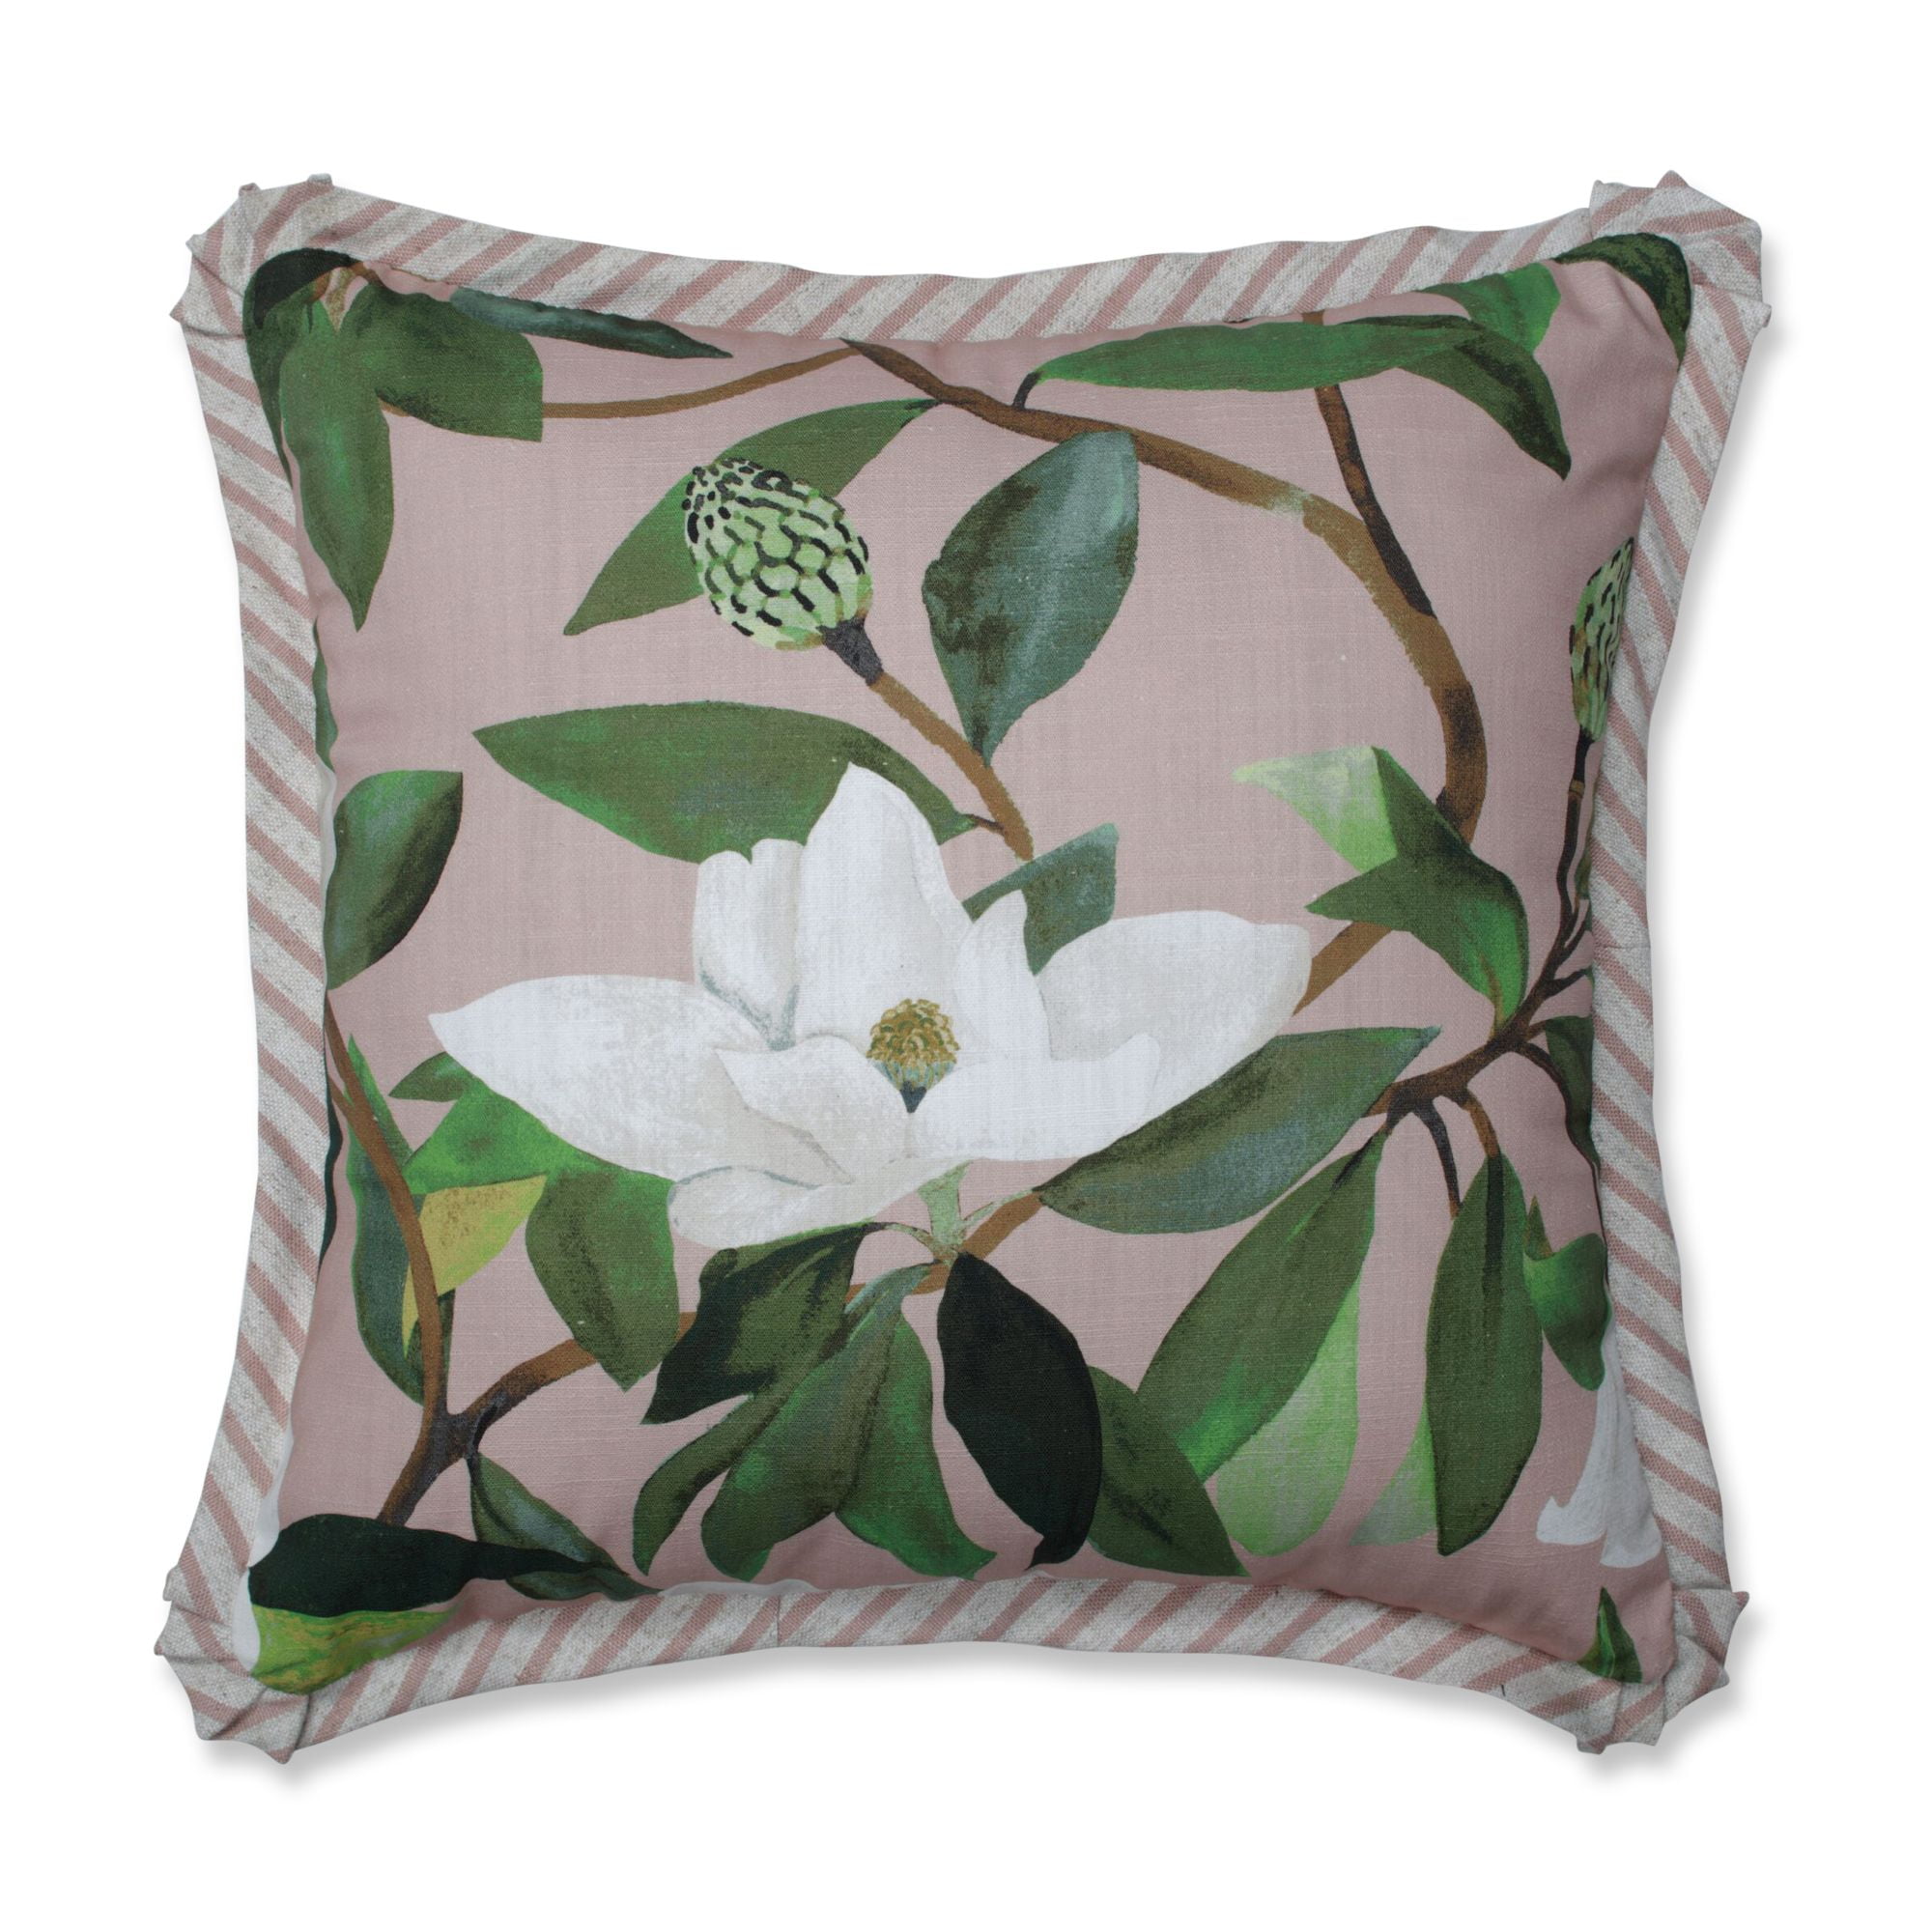 2 Piece Summer The Pillow Collection Set of 2 18 x 18 Down Filled Ellisras Floral Throw Pillows